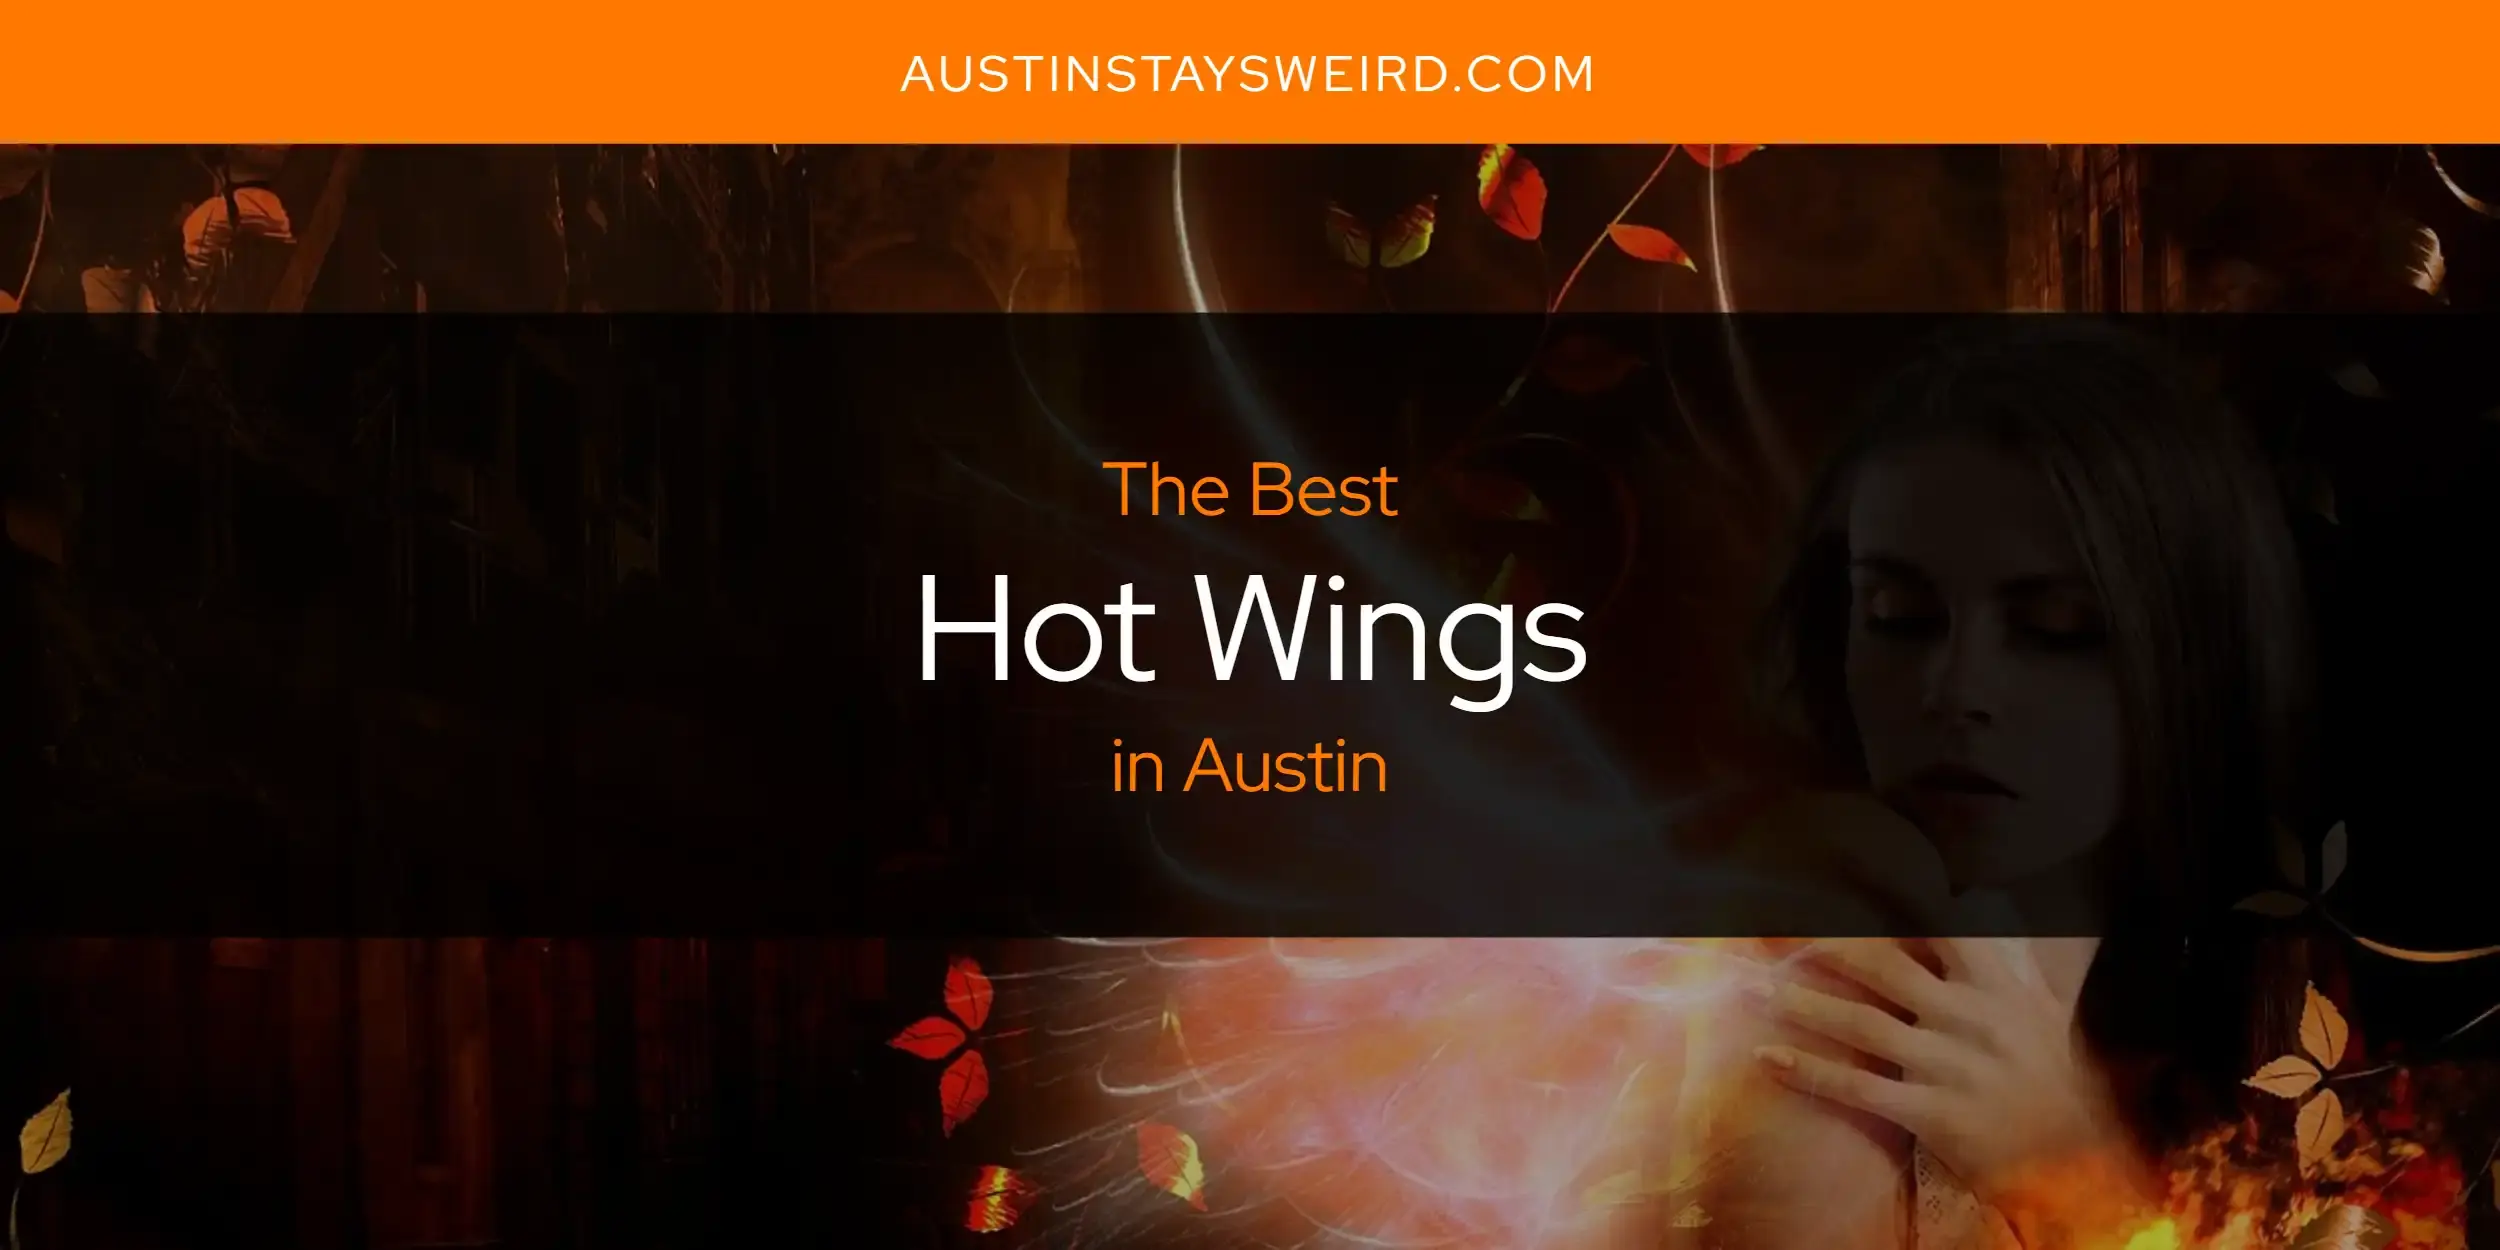 Best Hot Wings in Austin? Here's the Top 8